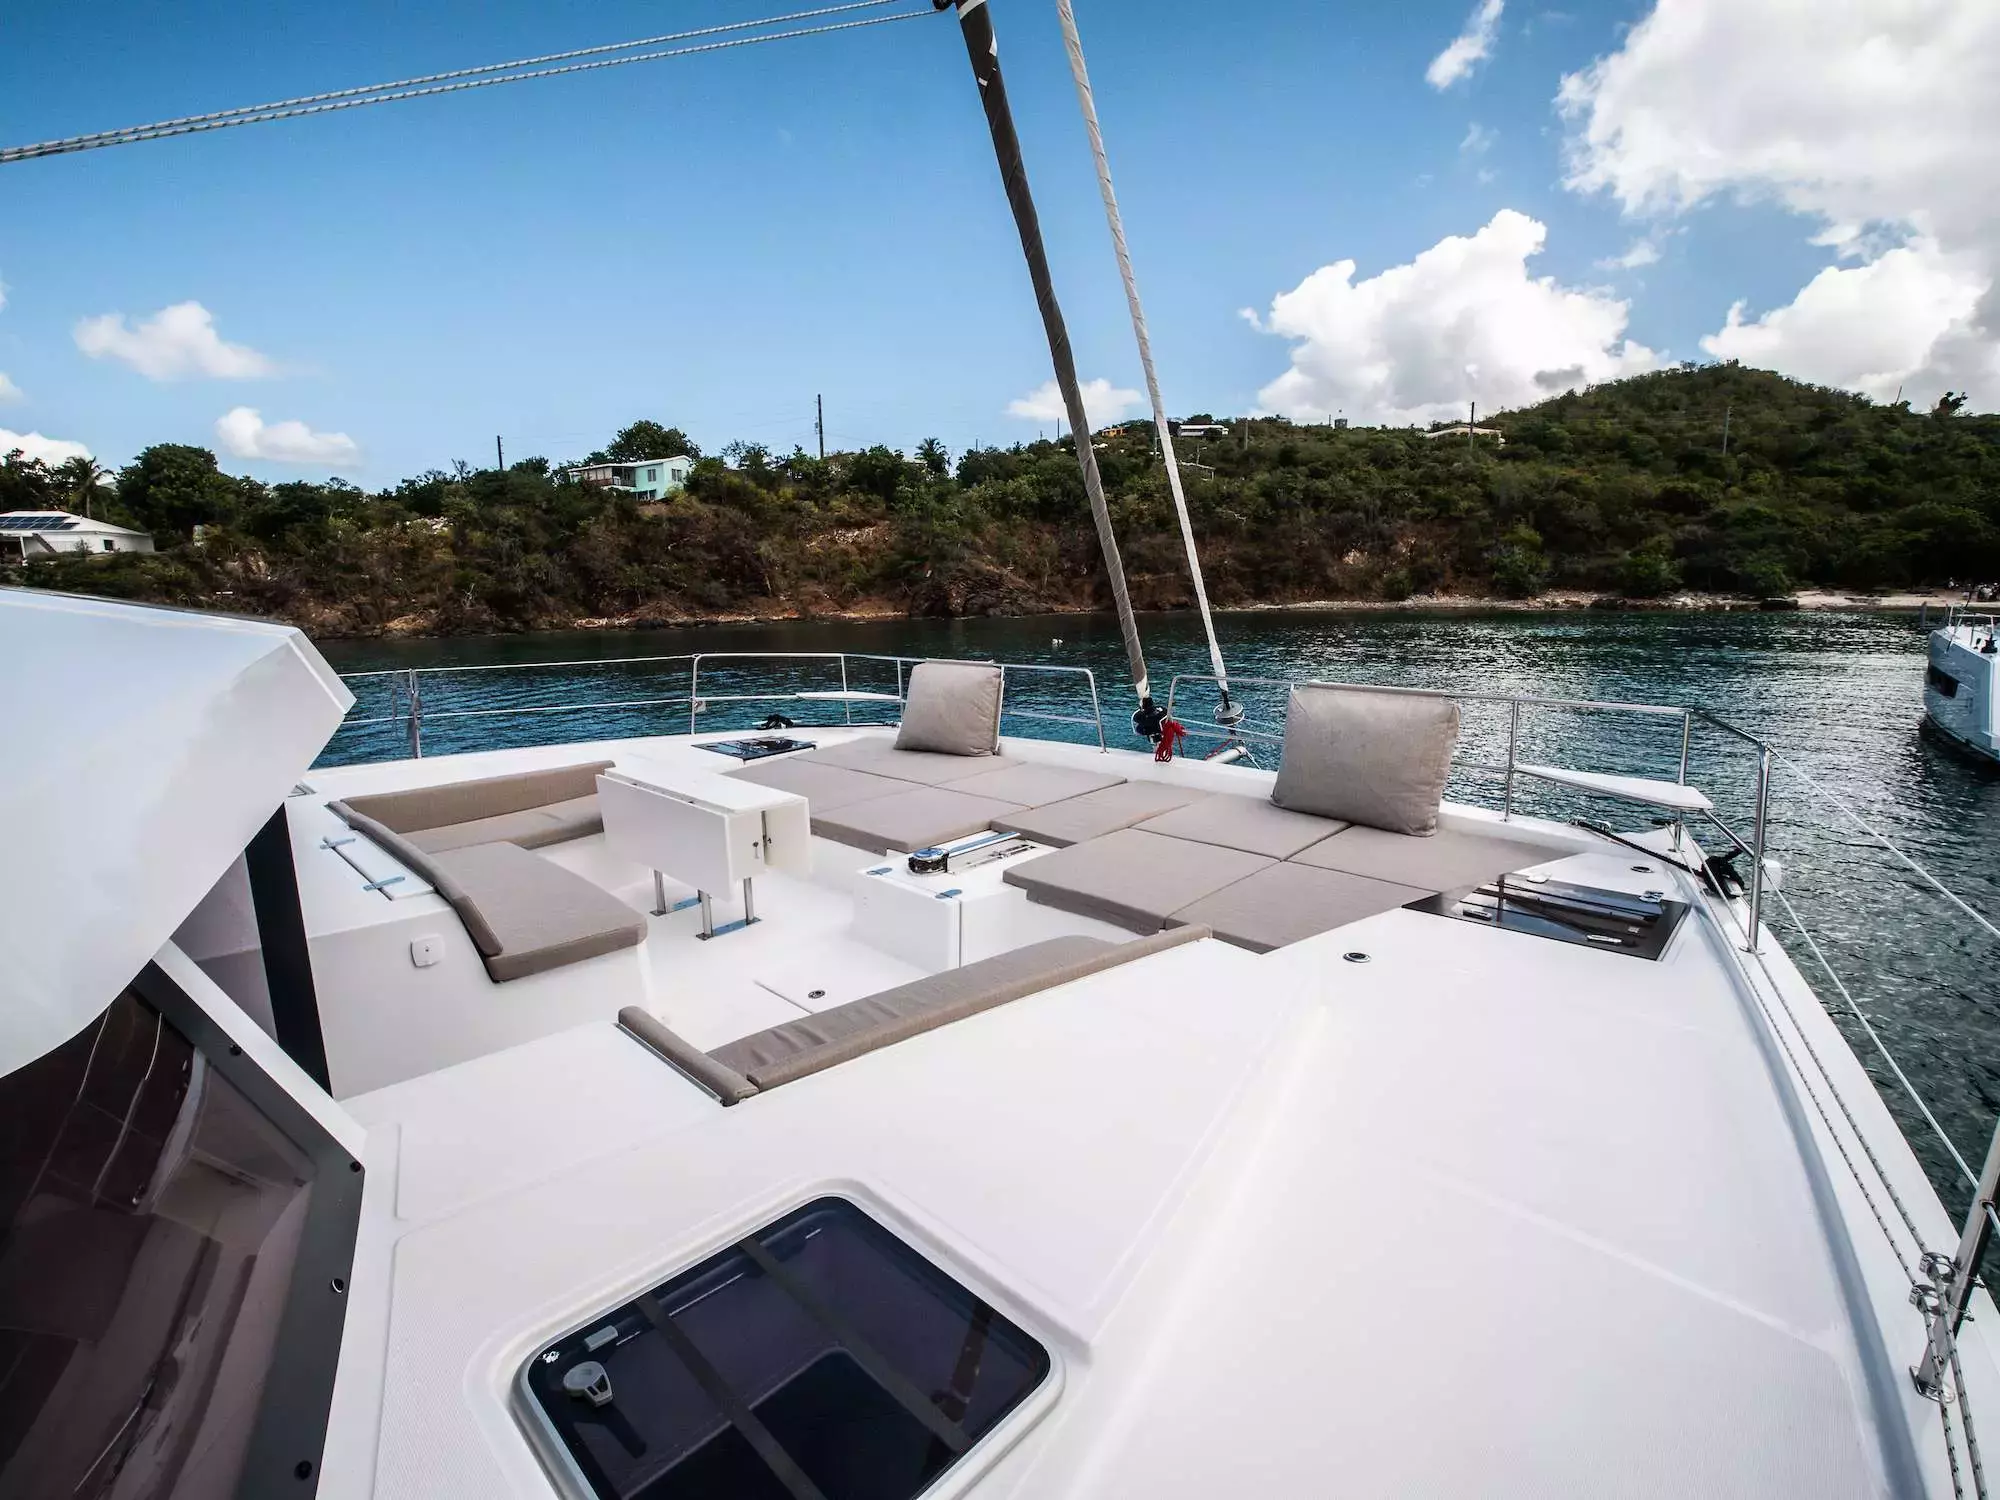 Escapade I by Bali Catamarans - Top rates for a Charter of a private Luxury Catamaran in British Virgin Islands